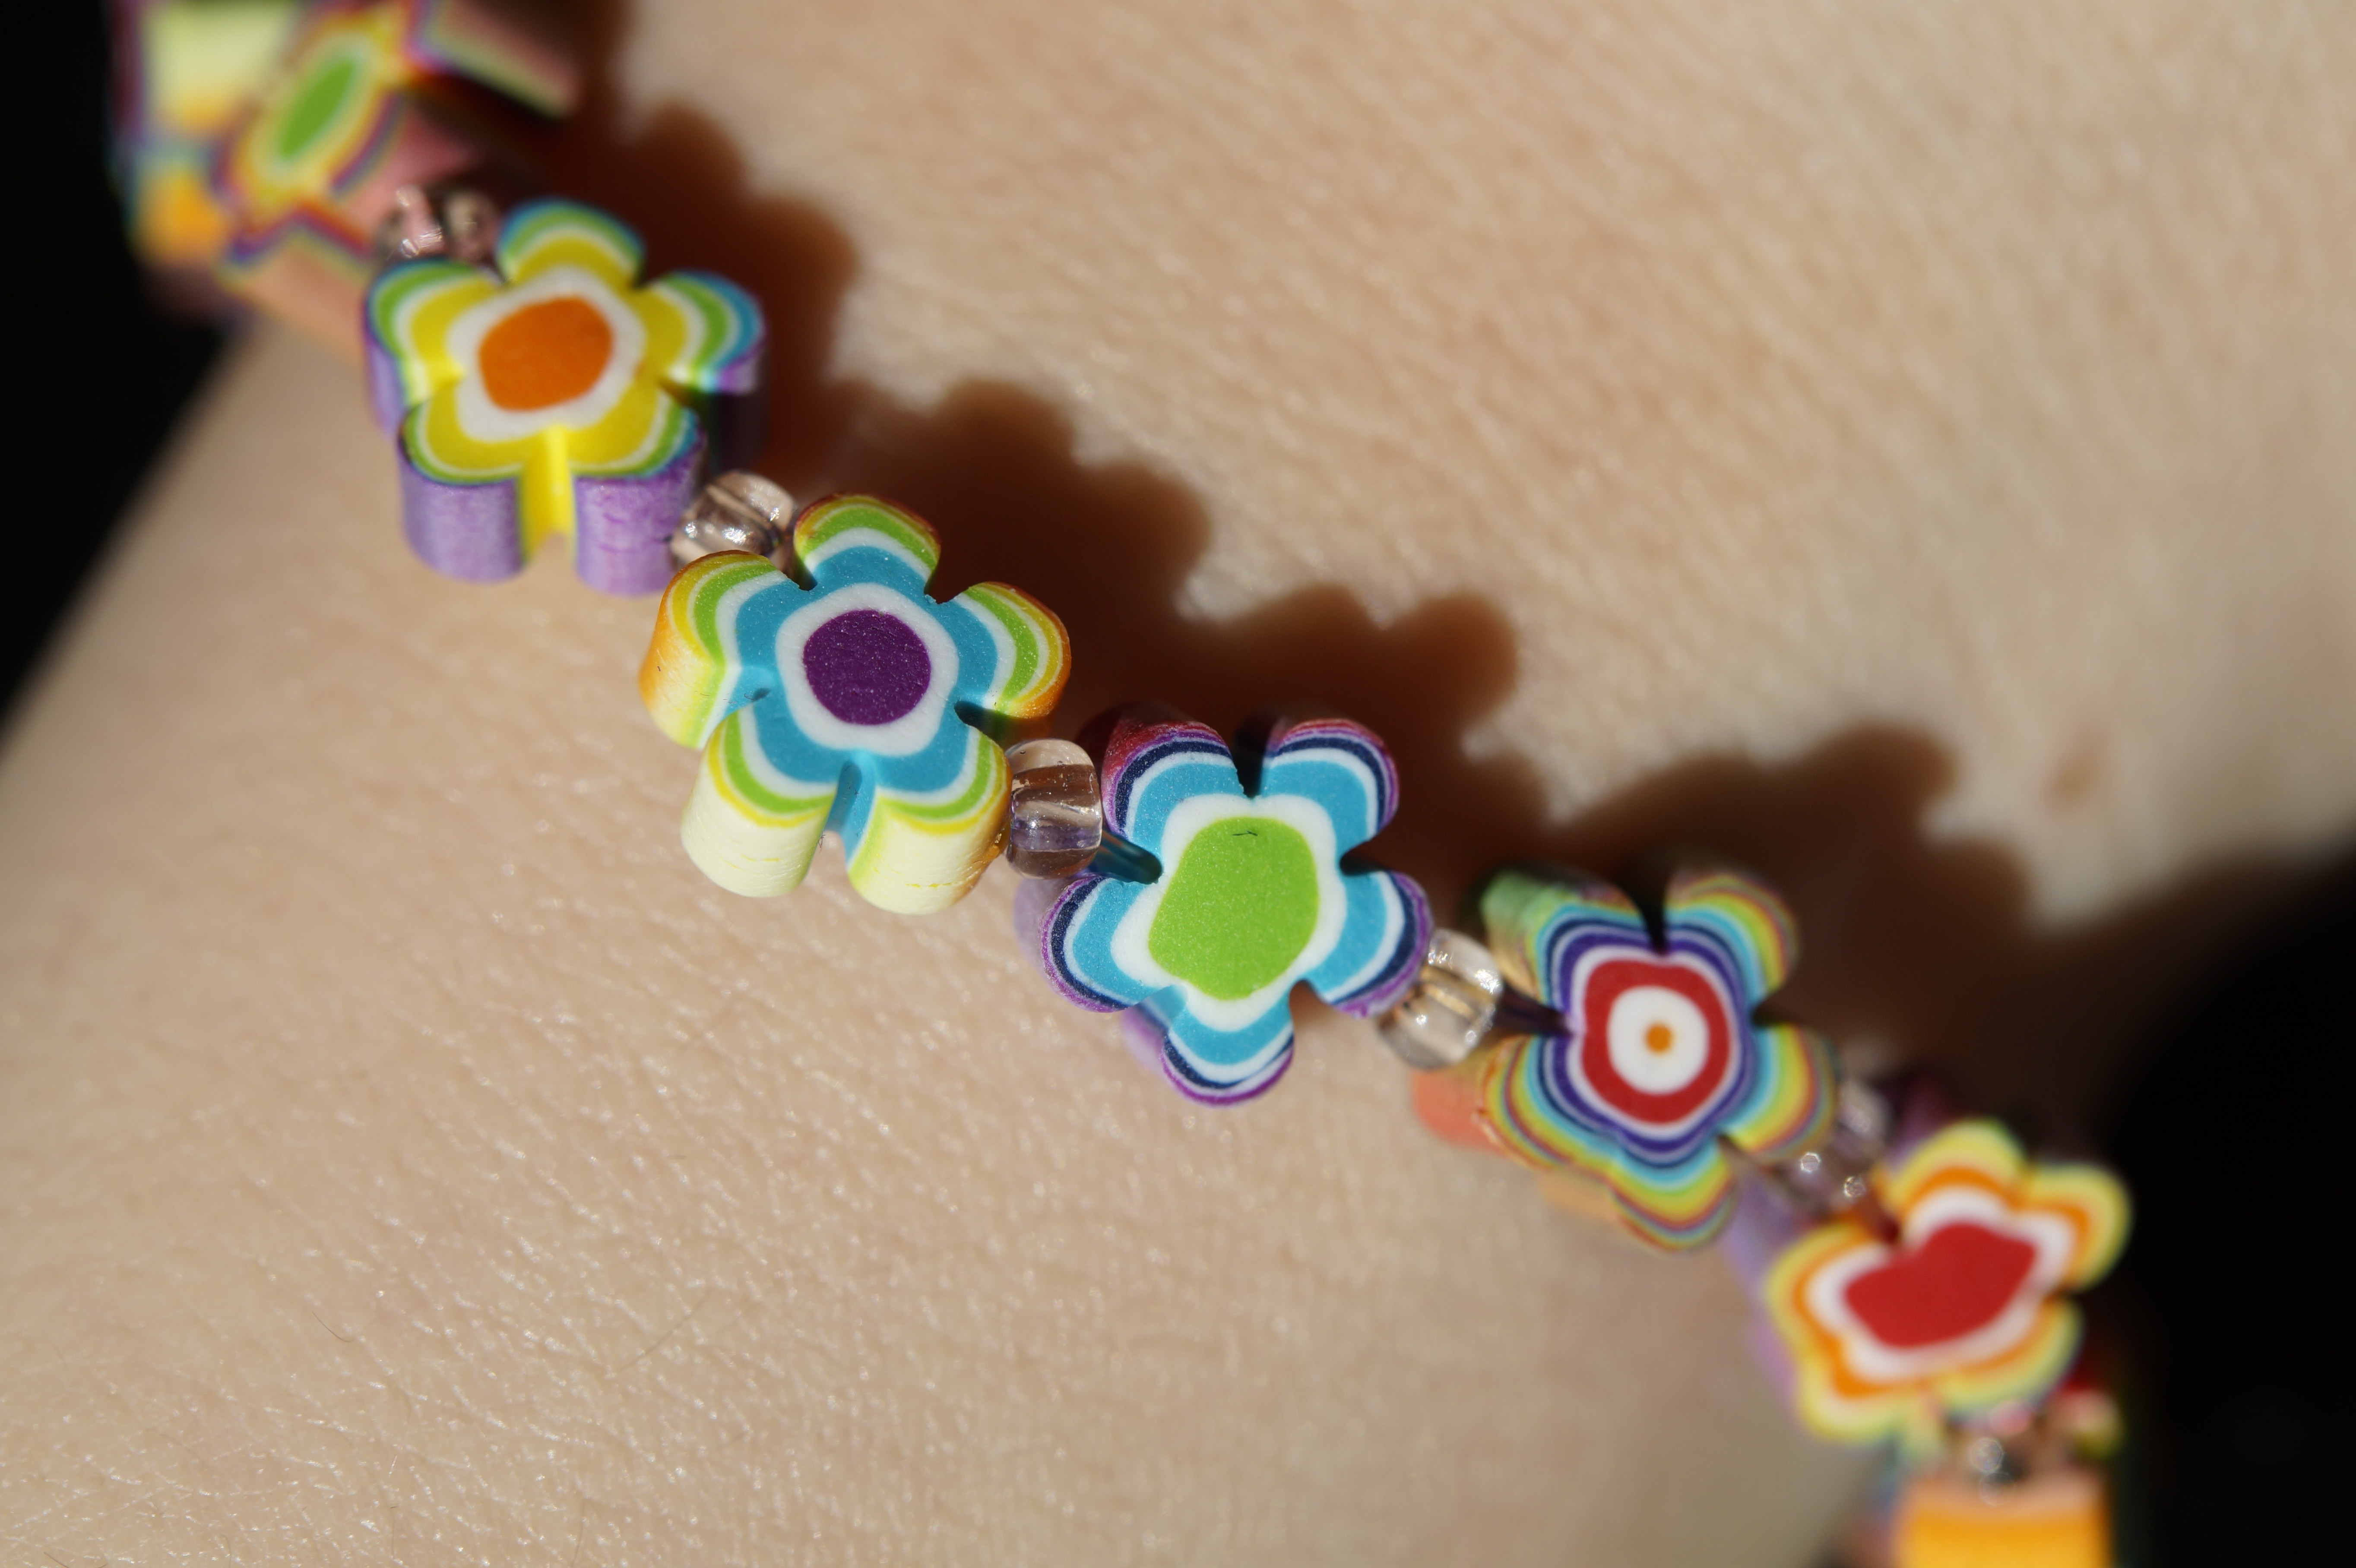 Flowers, Floral, Colorful, Bracelet, multi colored, no people